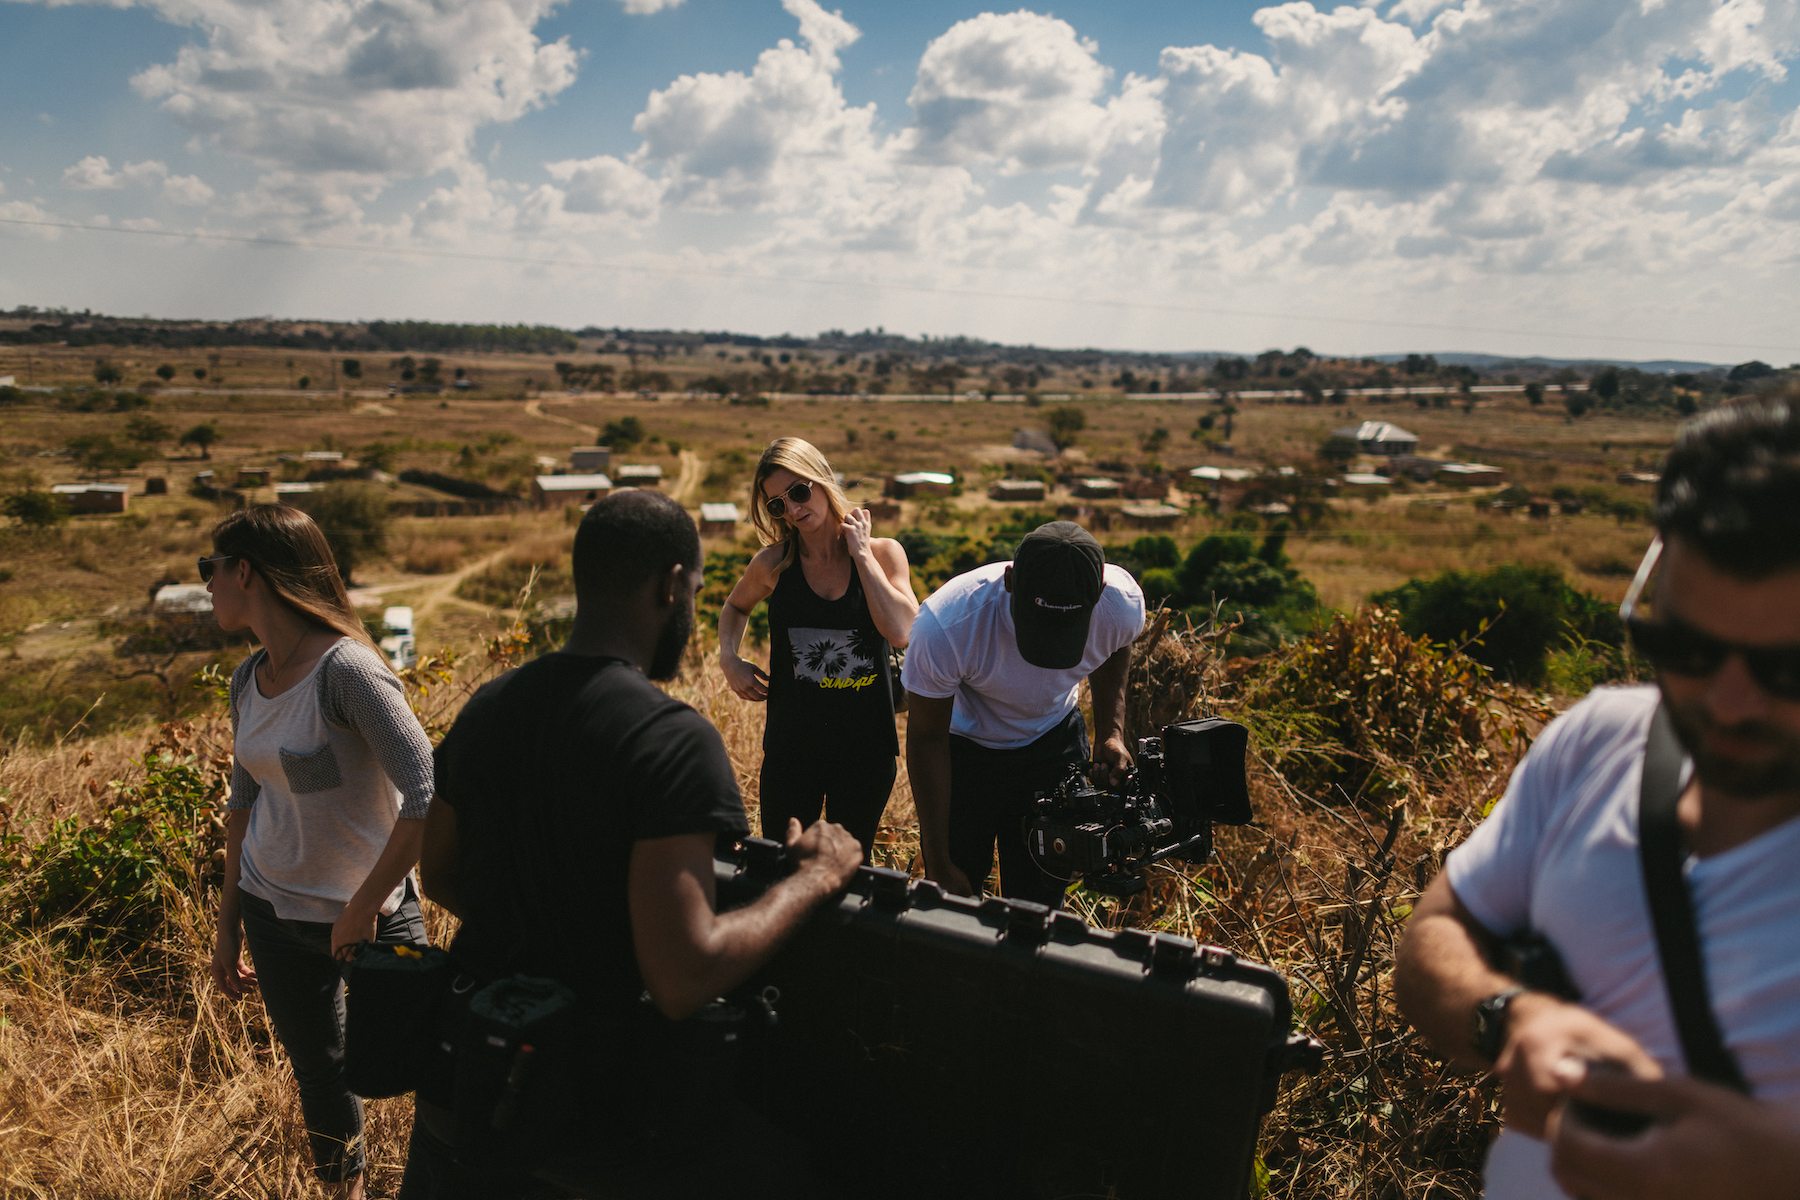 JSM Three men and two women getting video equipment set up in a field